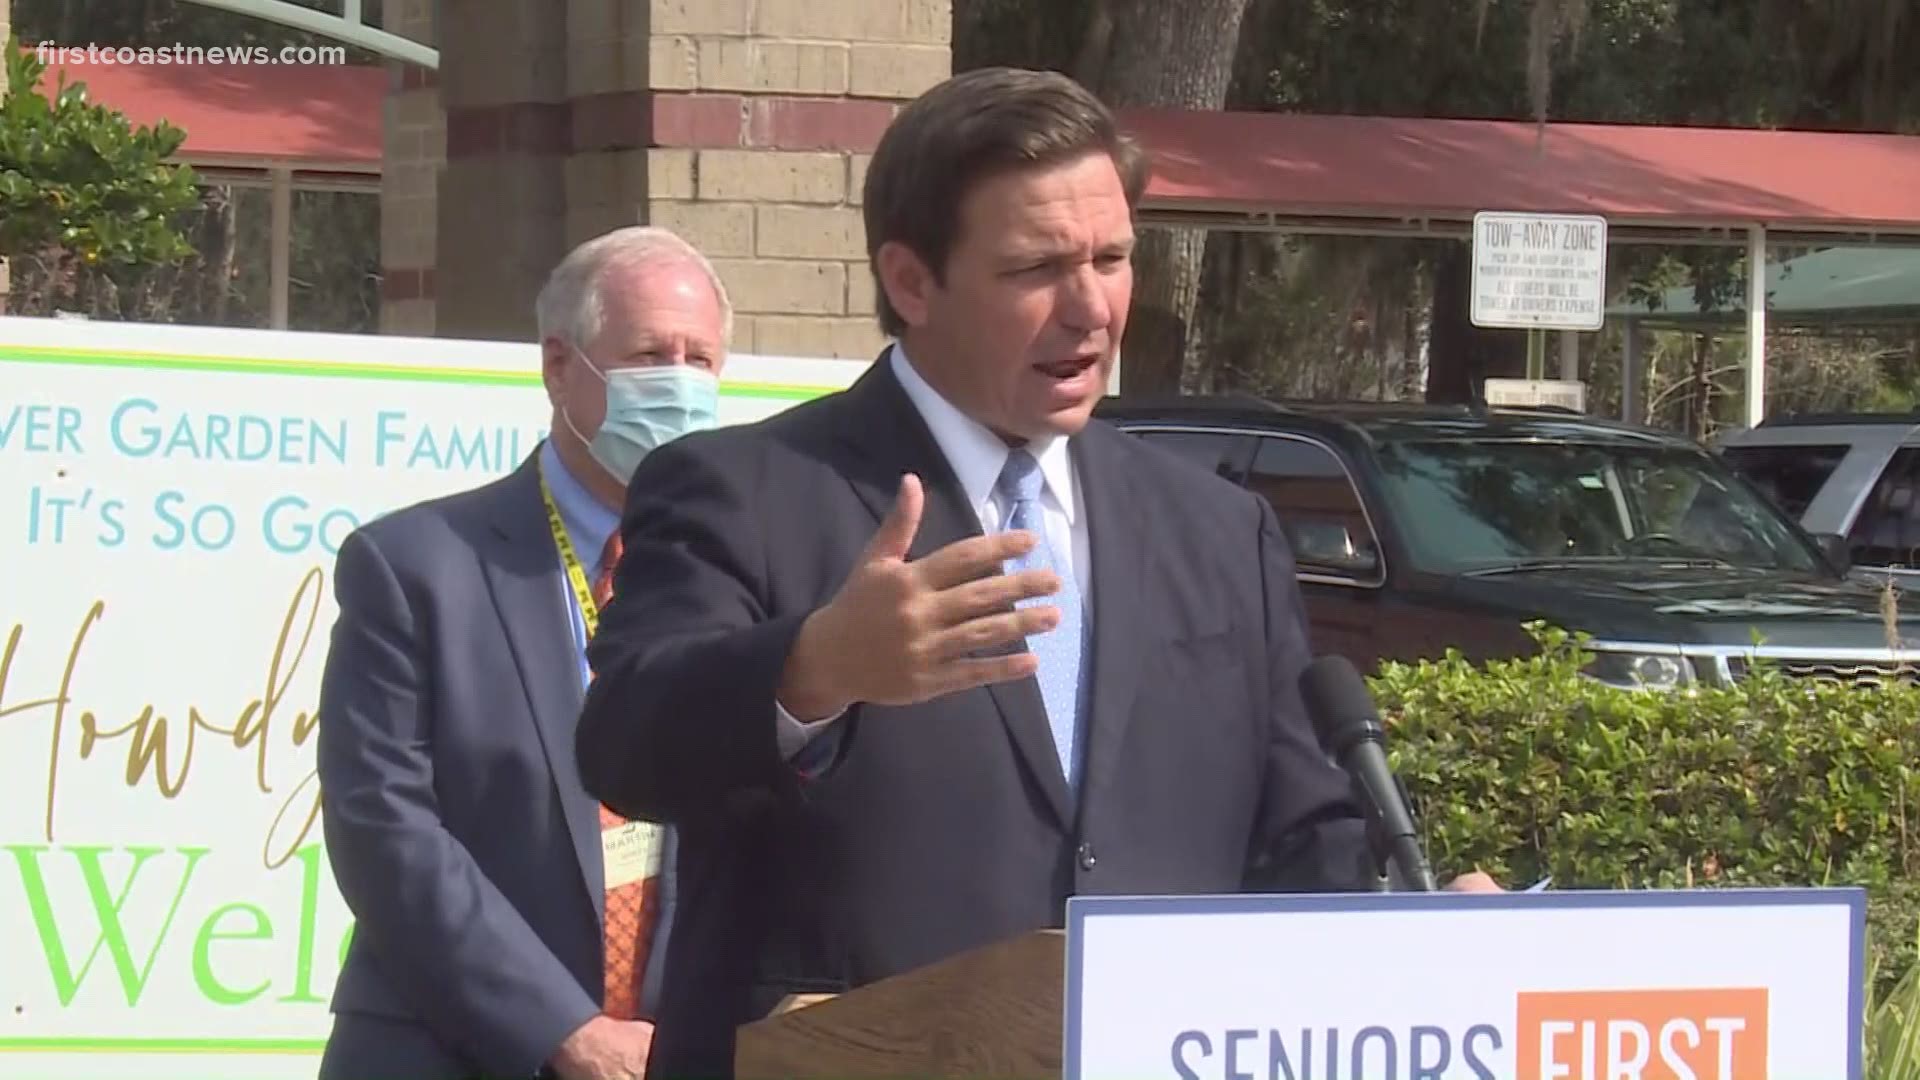 DeSantis said that by the end of this month, the vaccine will have been offered to all residents of long-term care facilities.